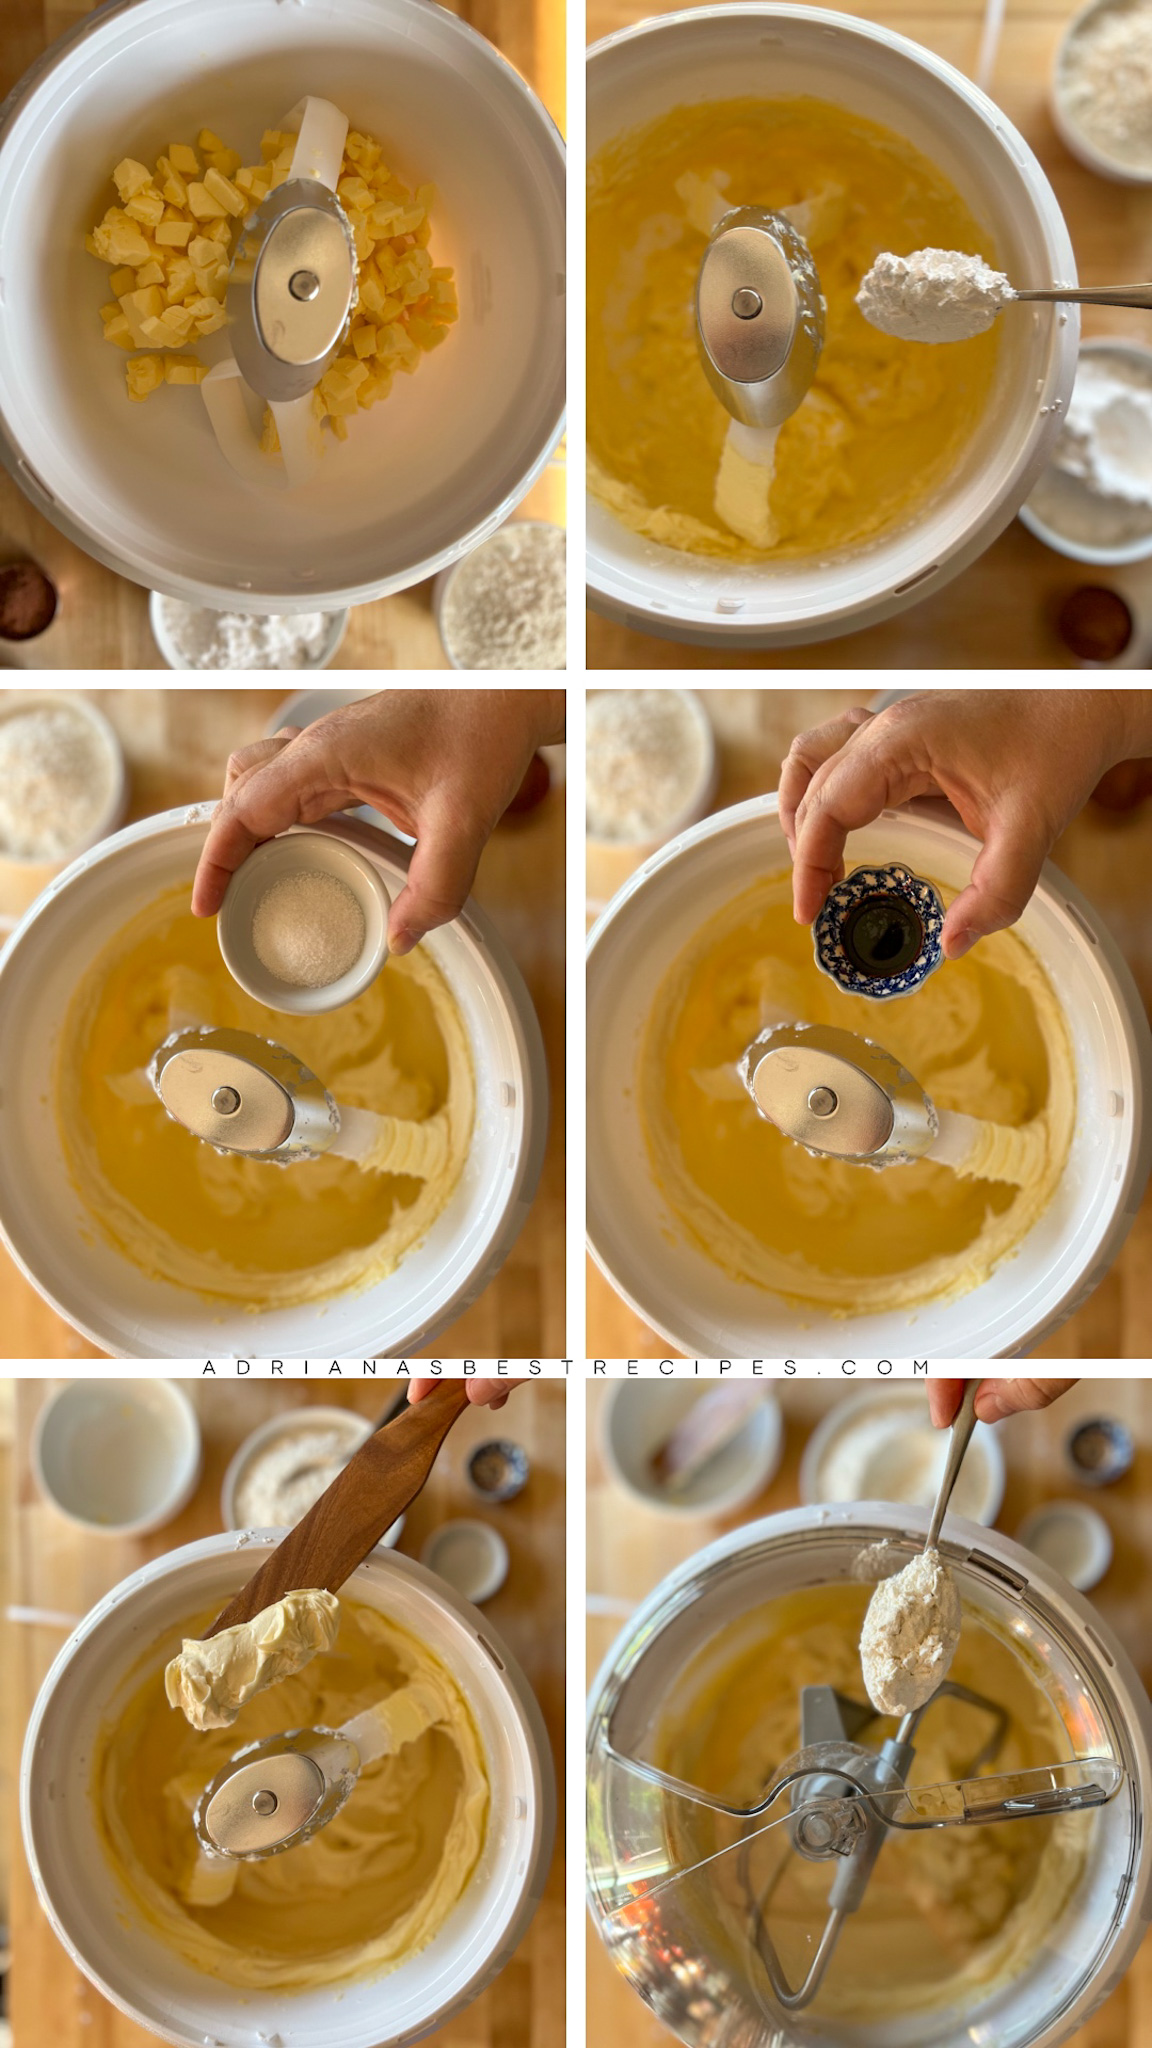 Step by step on how to prepare the cookie dough